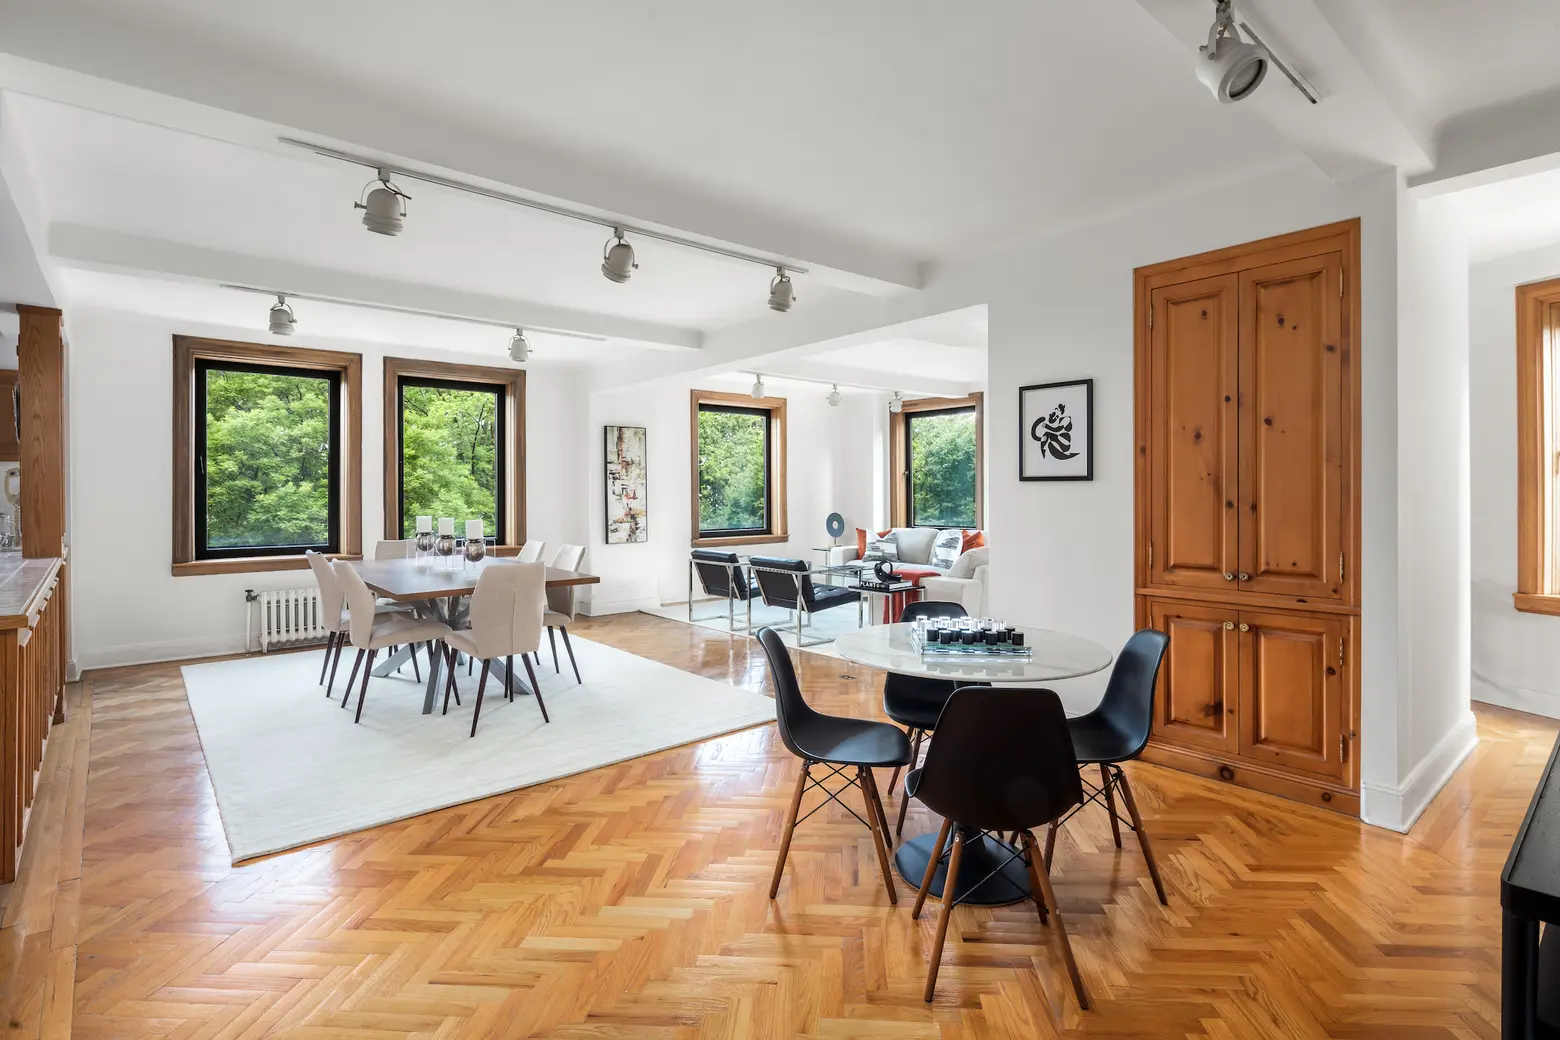 Ben Stiller’s childhood home on the Upper West Side is for sale after more than 50 years